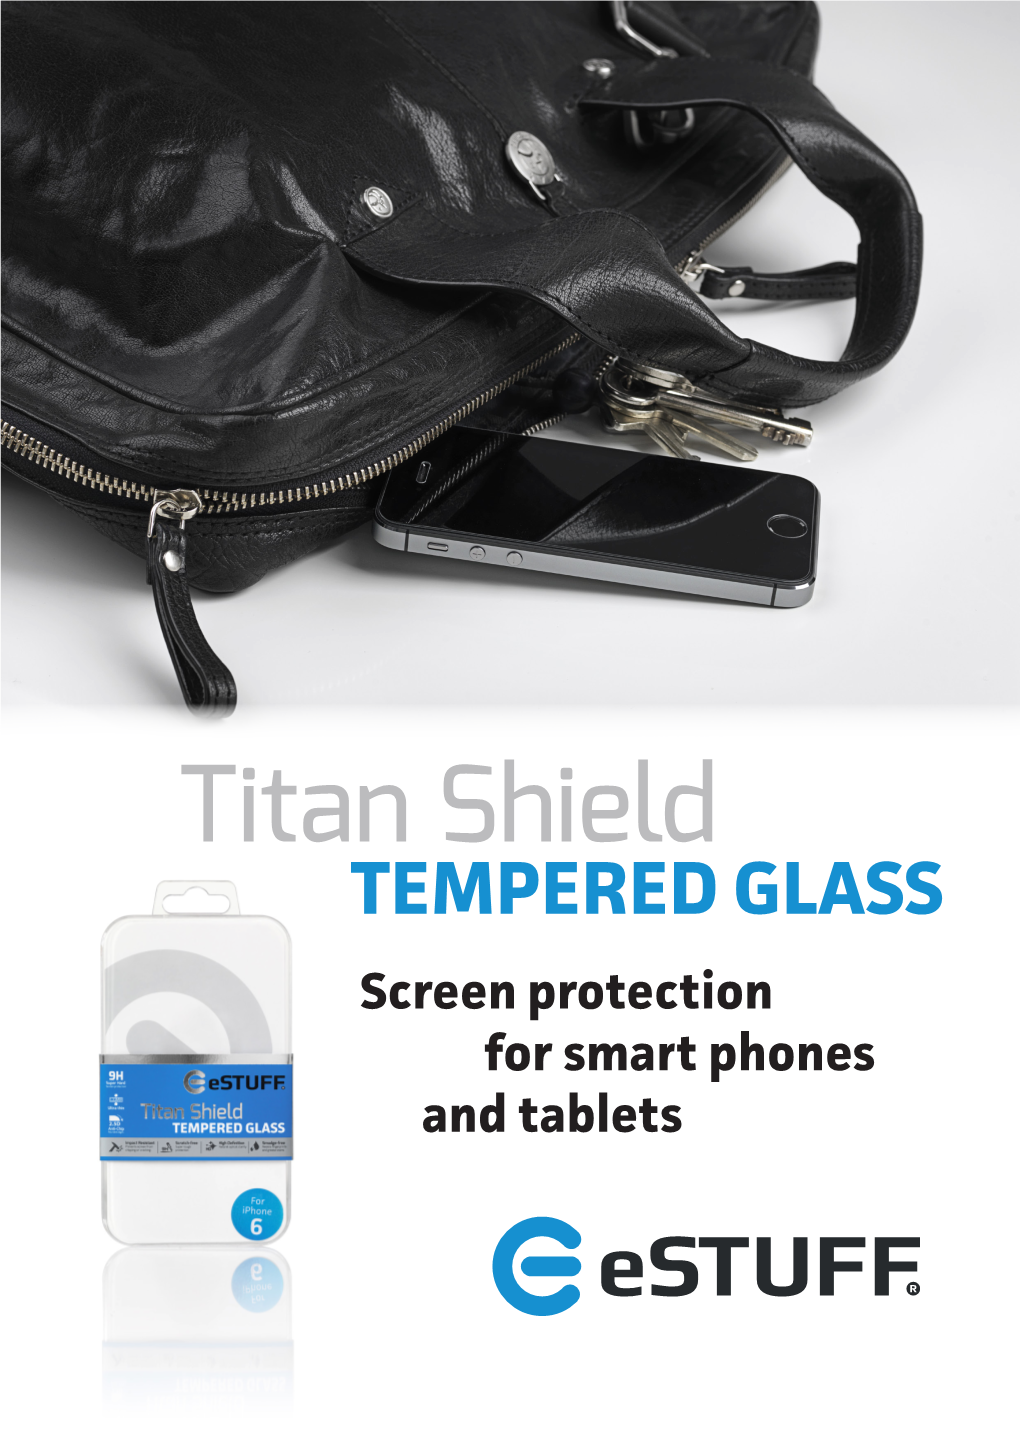 TEMPERED GLASS Screen Protection for Smart Phones and Tablets When It Comes to Touch Screens Nothing Beats Real Glass